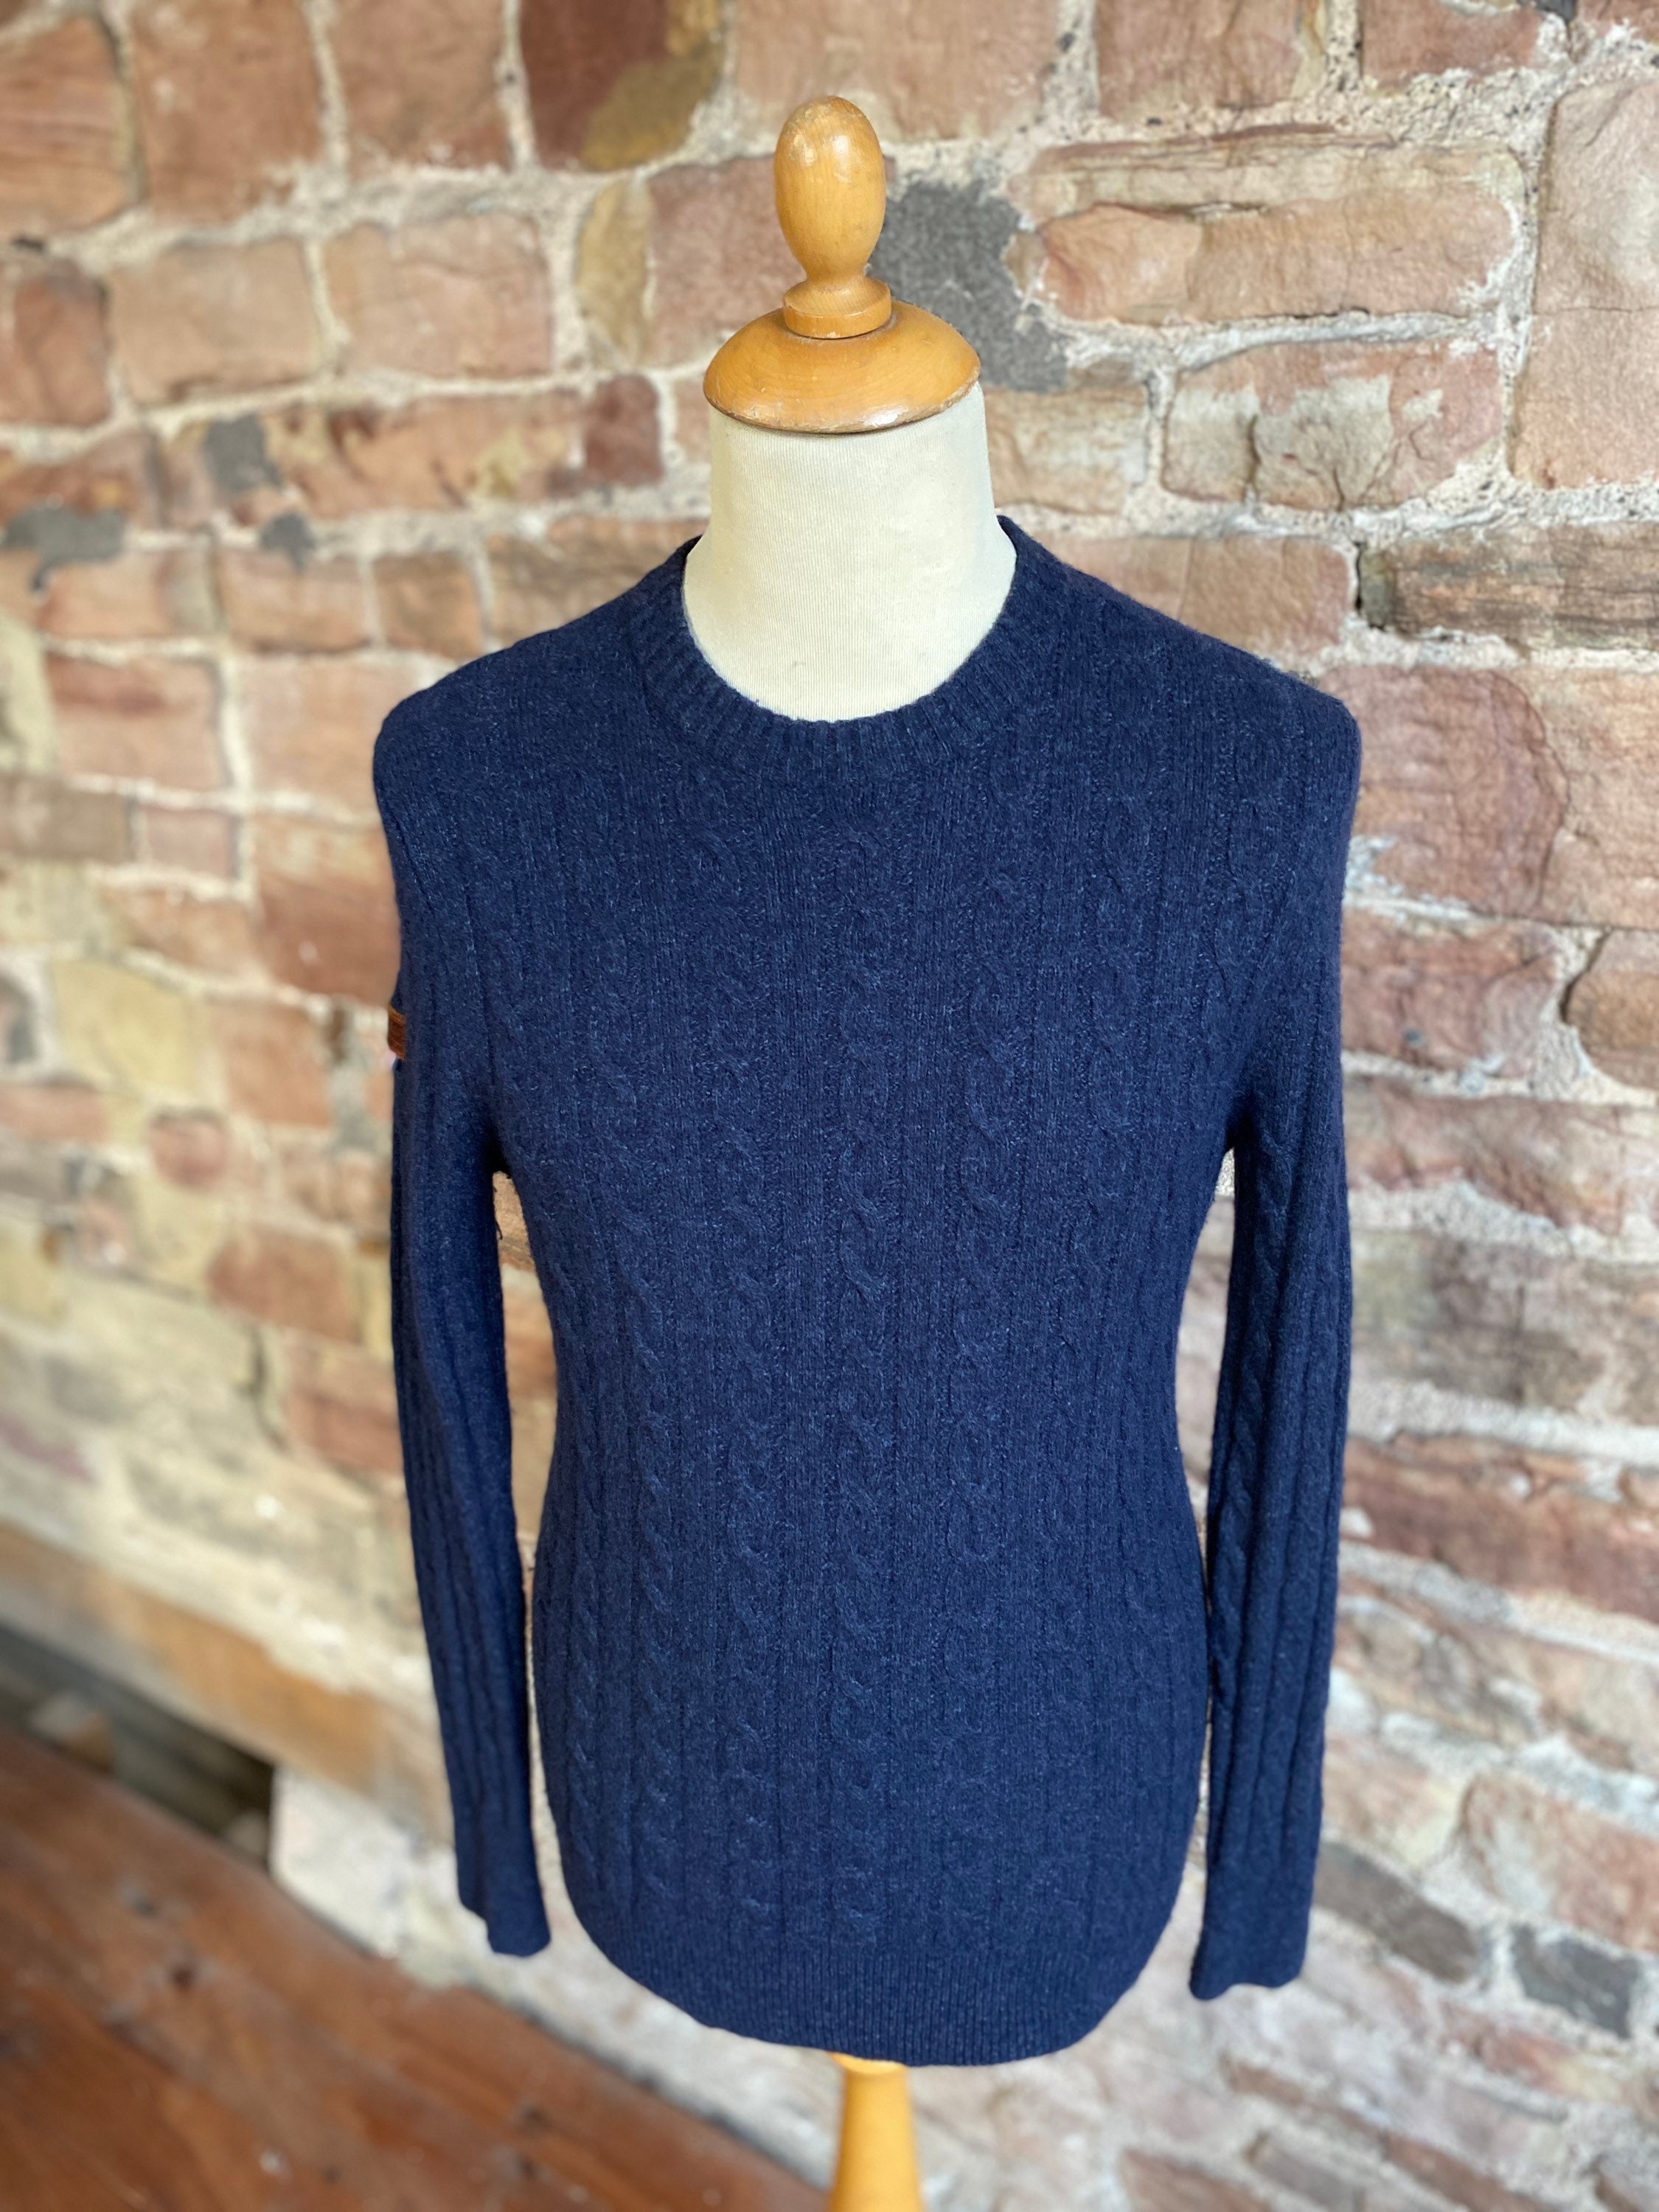 Superdry Co. Lambswool Mix Ribbed Knit Crew Neck Sweater. FREE - Etsy Israel